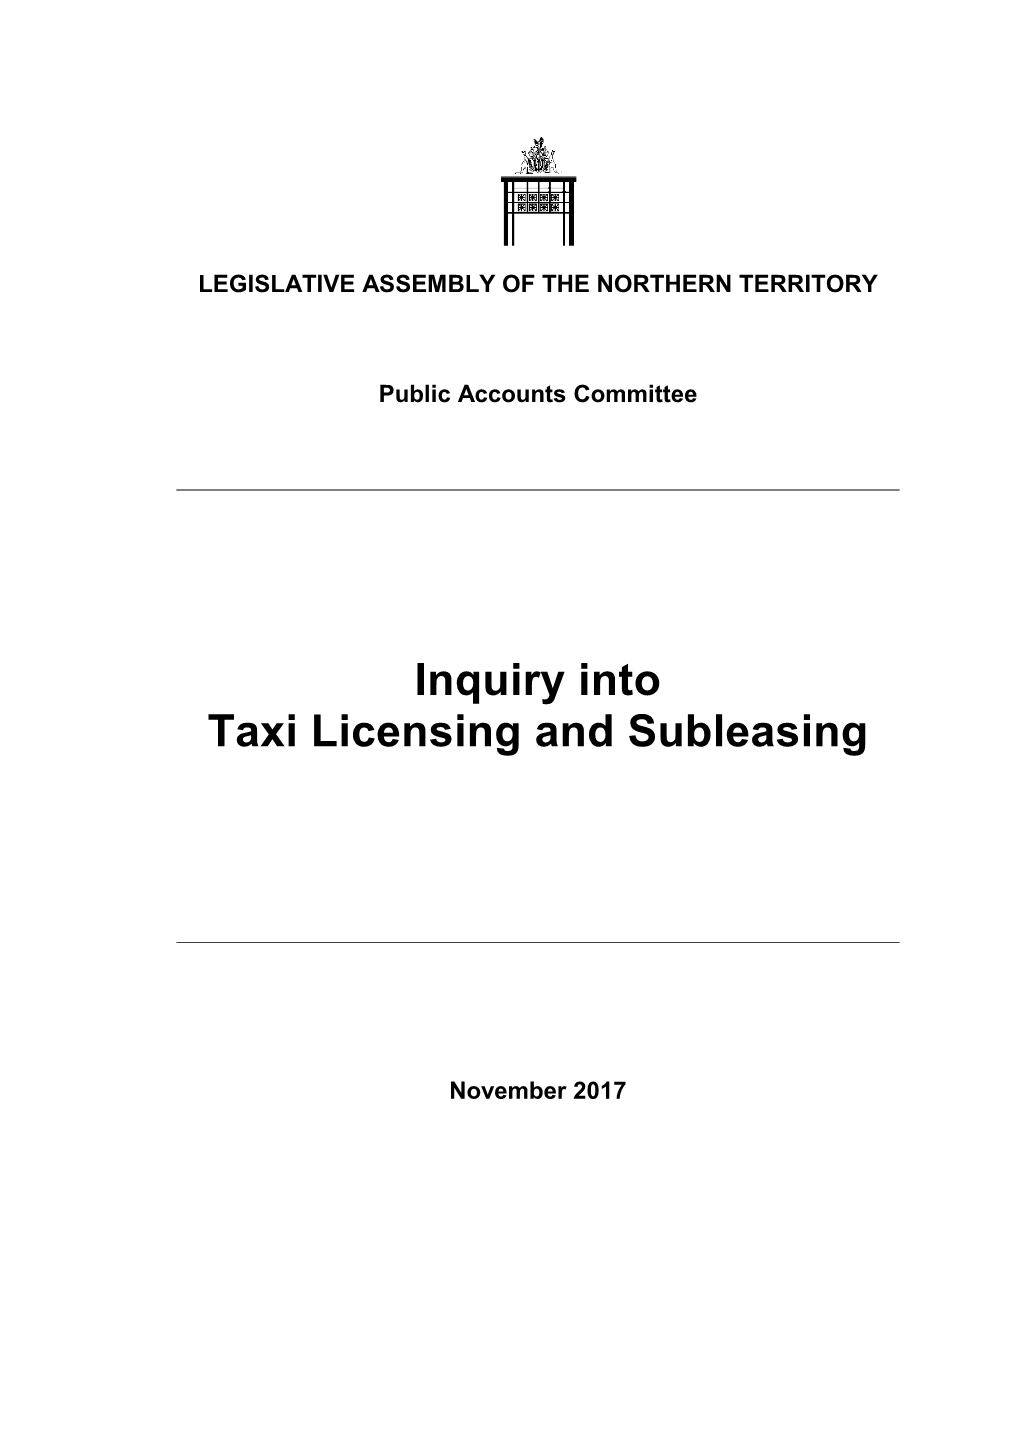 Inquiry Into Taxi Licensing and Subleasing